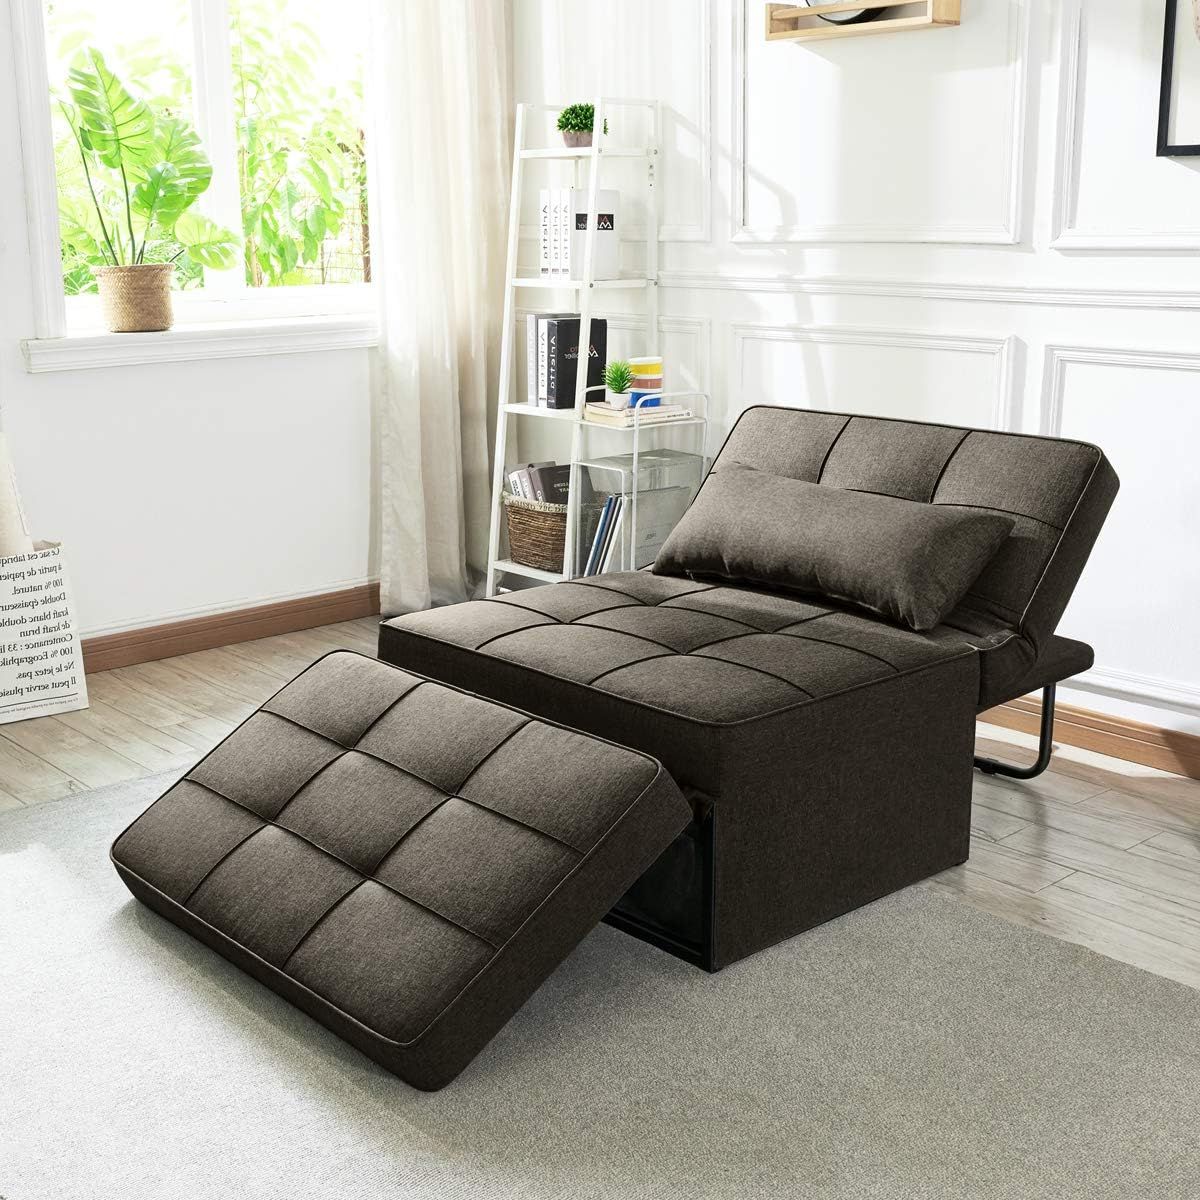 Widely Used Vonanda Sofa Bed, Convertible Chair 4 In 1 Multi Function Folding Intended For 4 In 1 Convertible Sleeper Chair Beds (View 2 of 15)